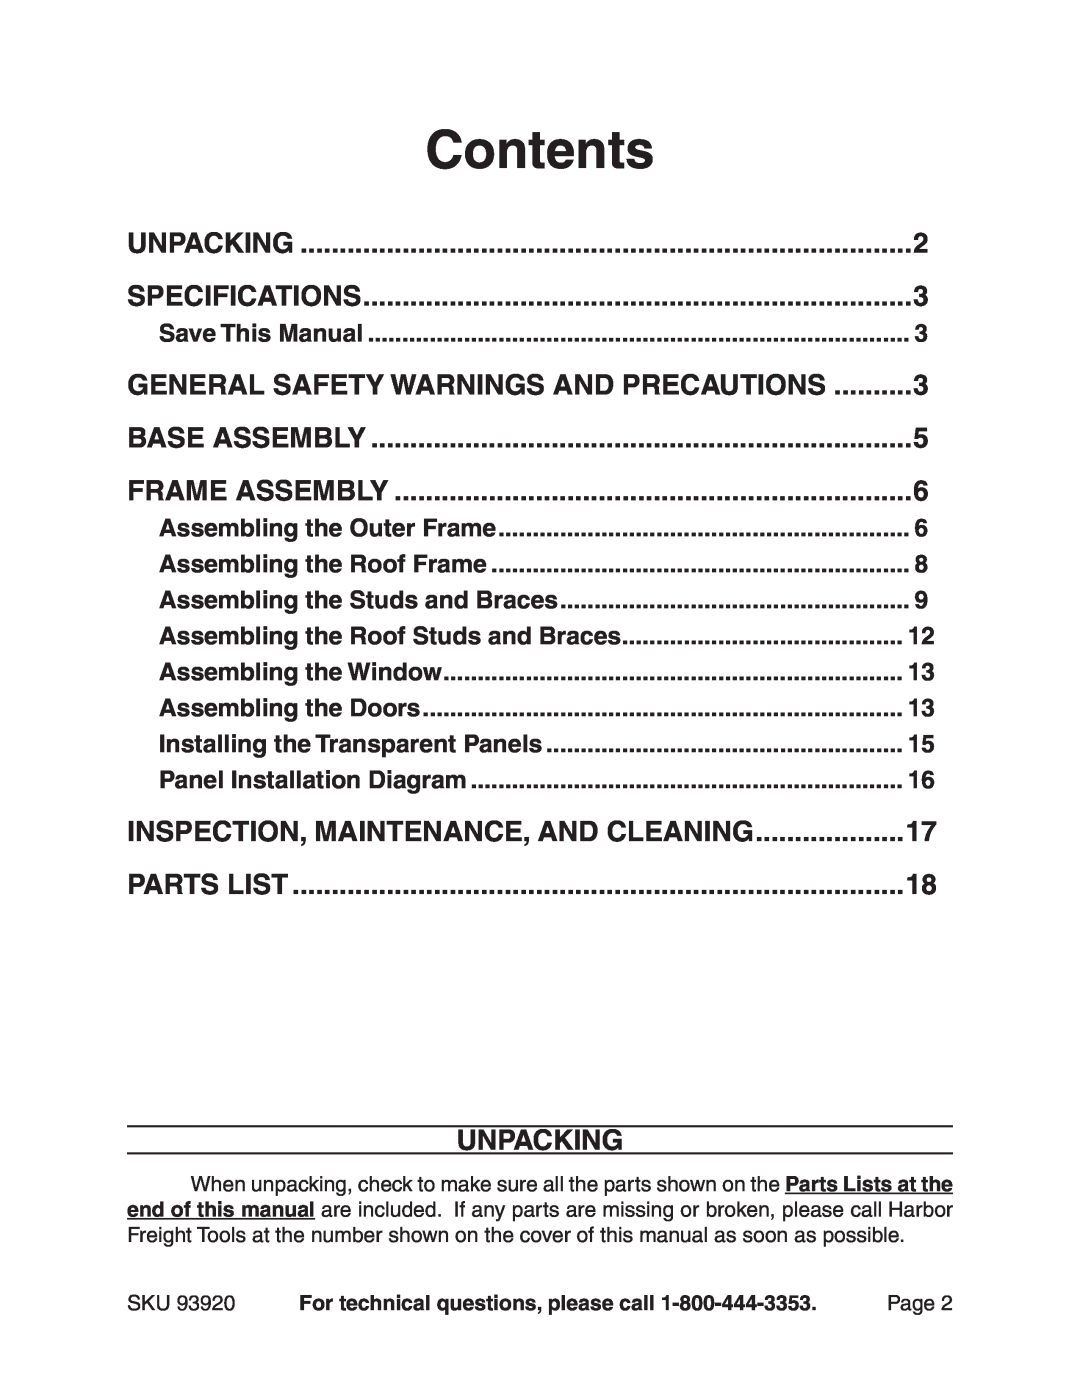 Harbor Freight Tools 93920 manual Contents, General Safety Warnings And Precautions, Base Assembly, Unpacking, Parts List 